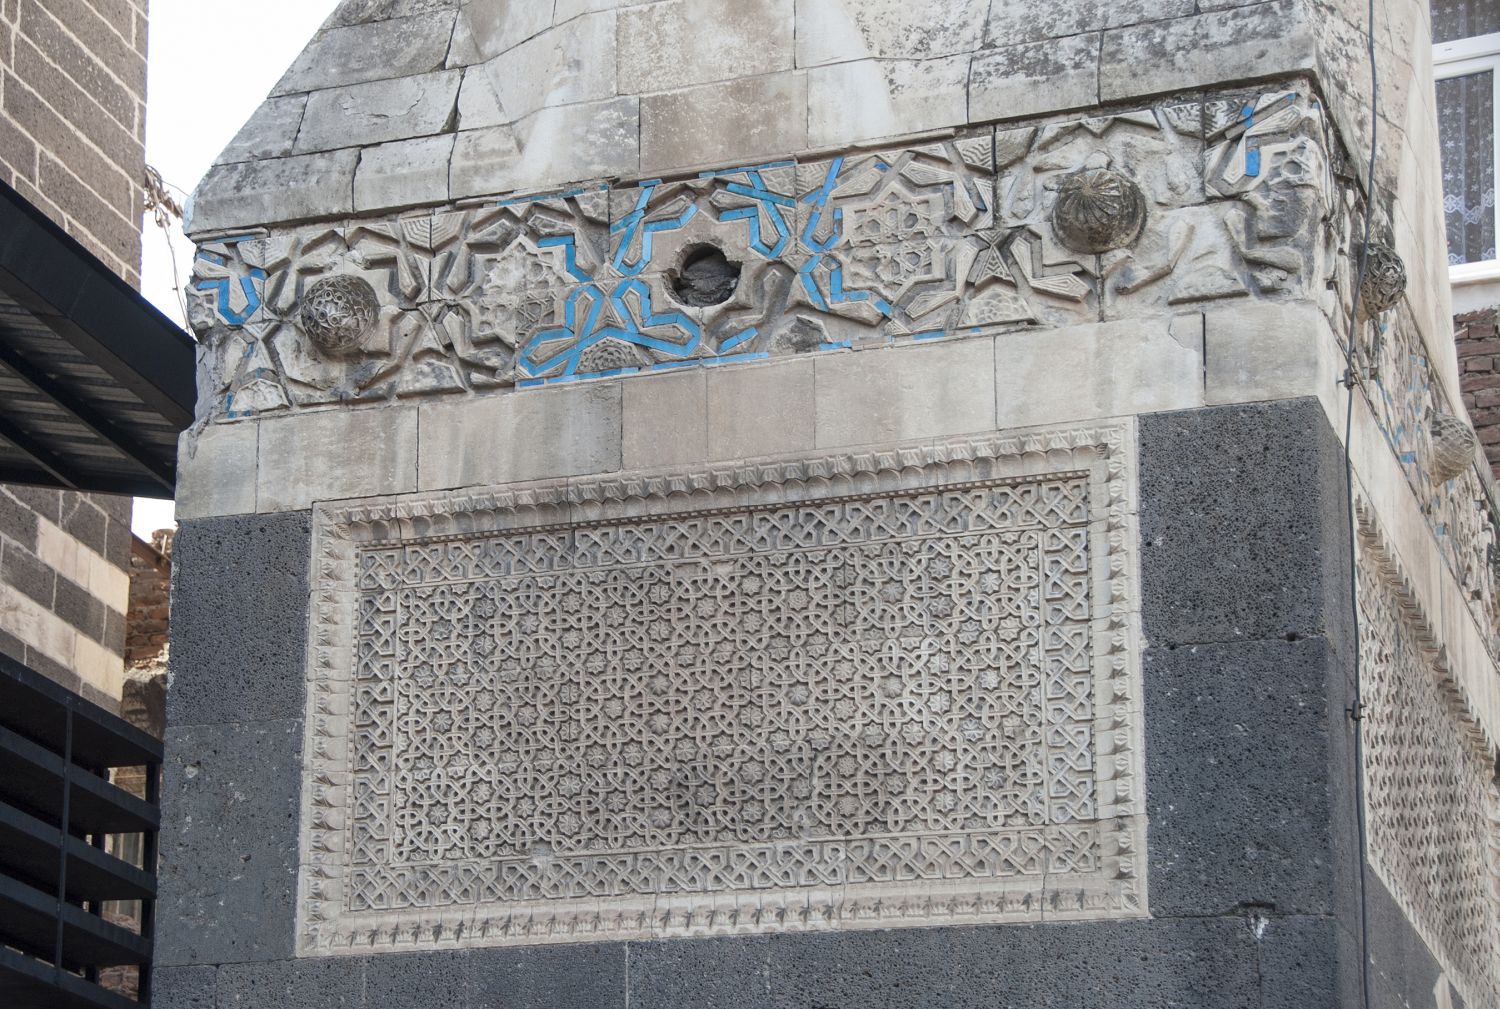 View of plaque with geometric ornament on base of minaret.